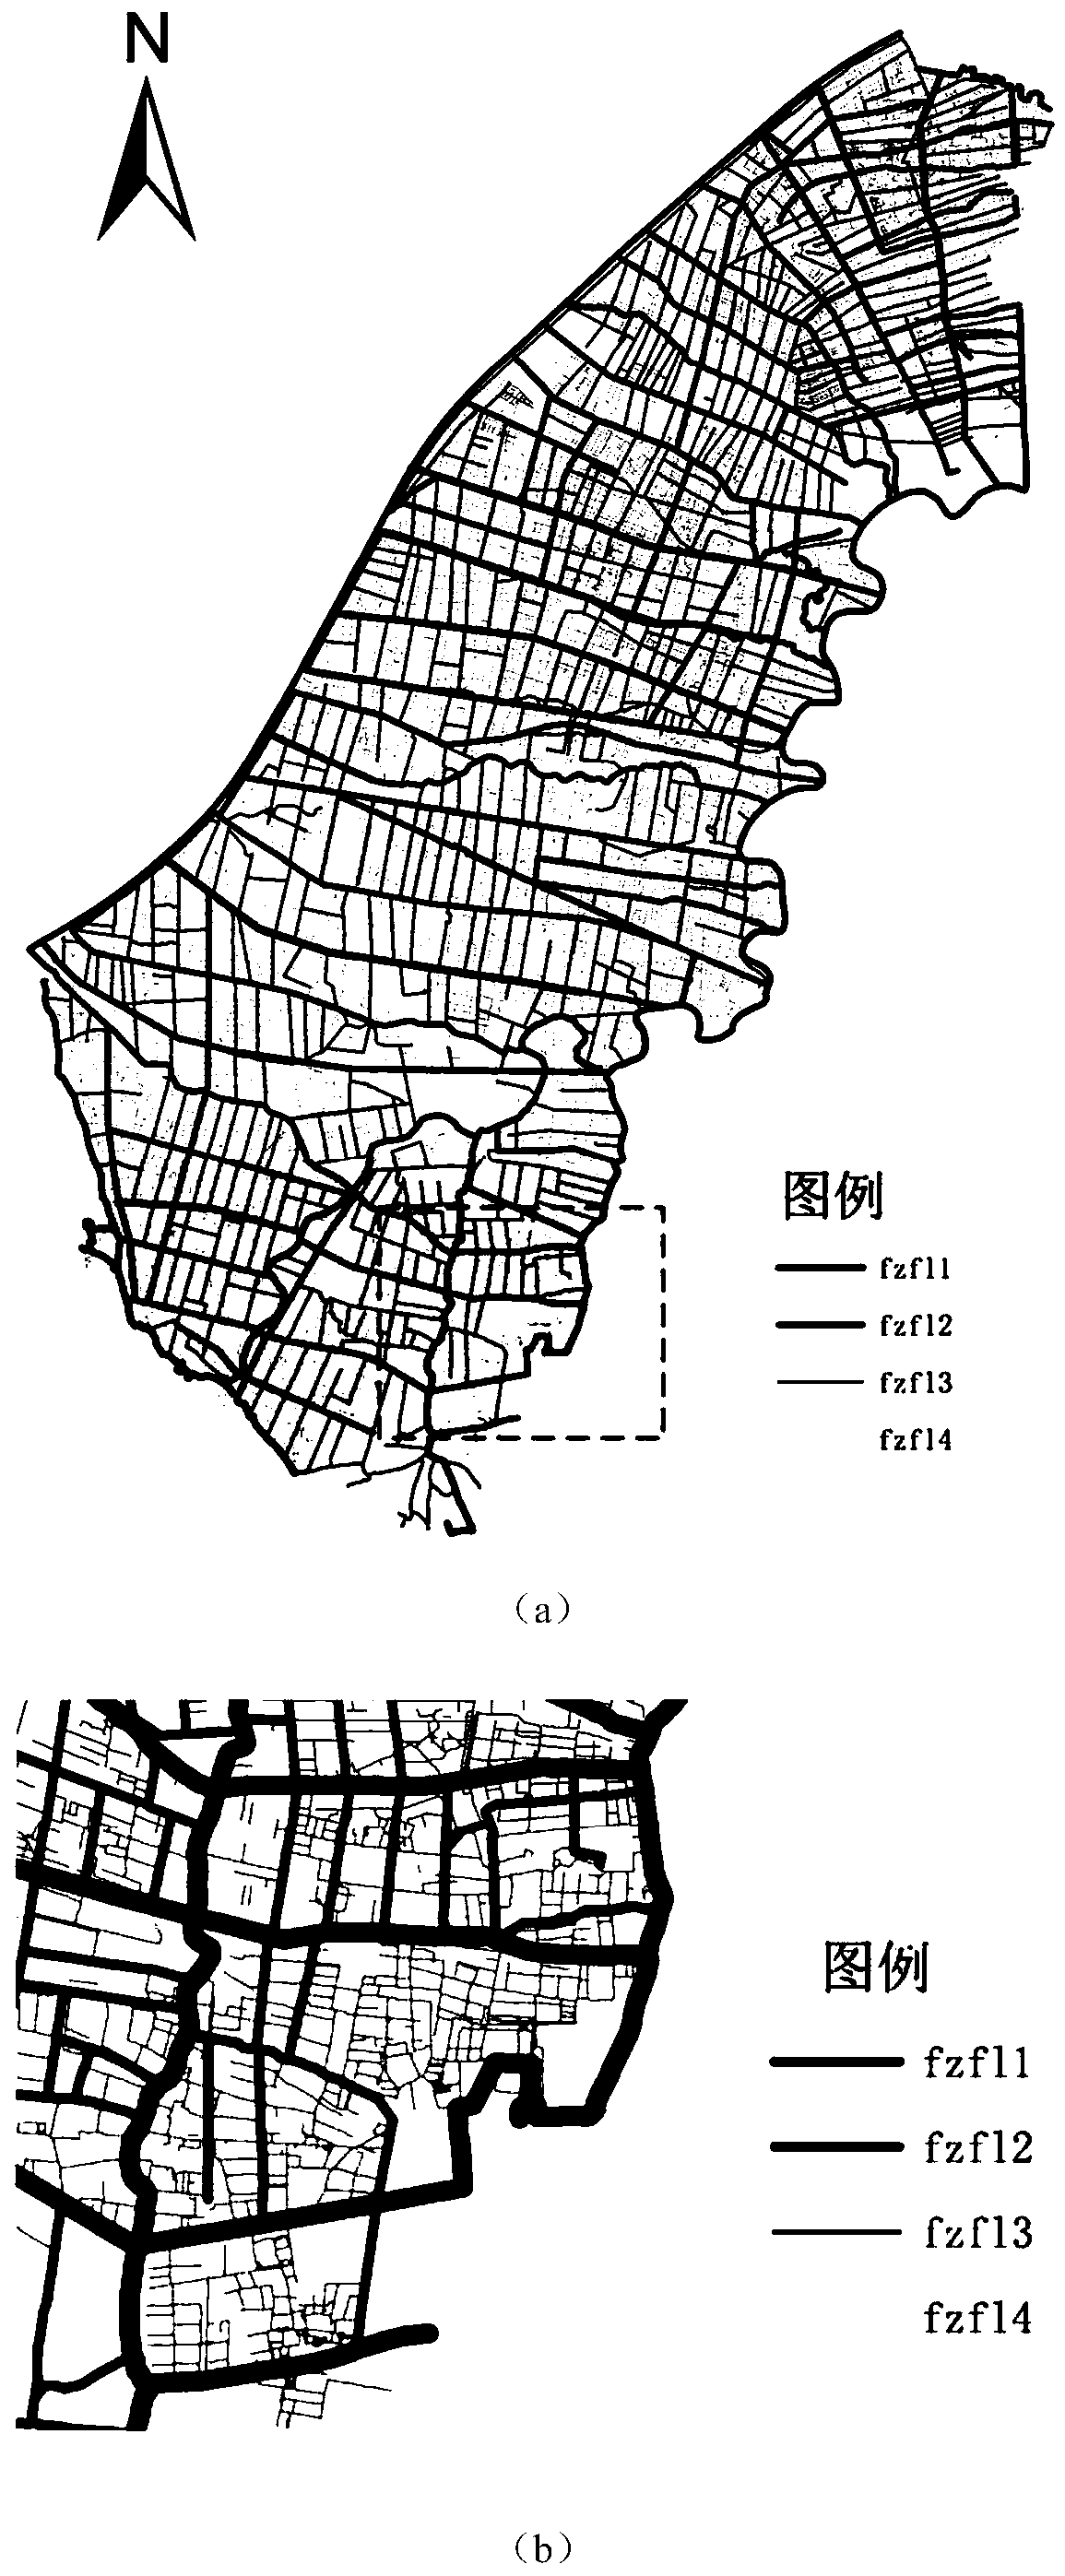 Plain irrigation district pump gate point position and type identification method based on GF-2 and Lidar data